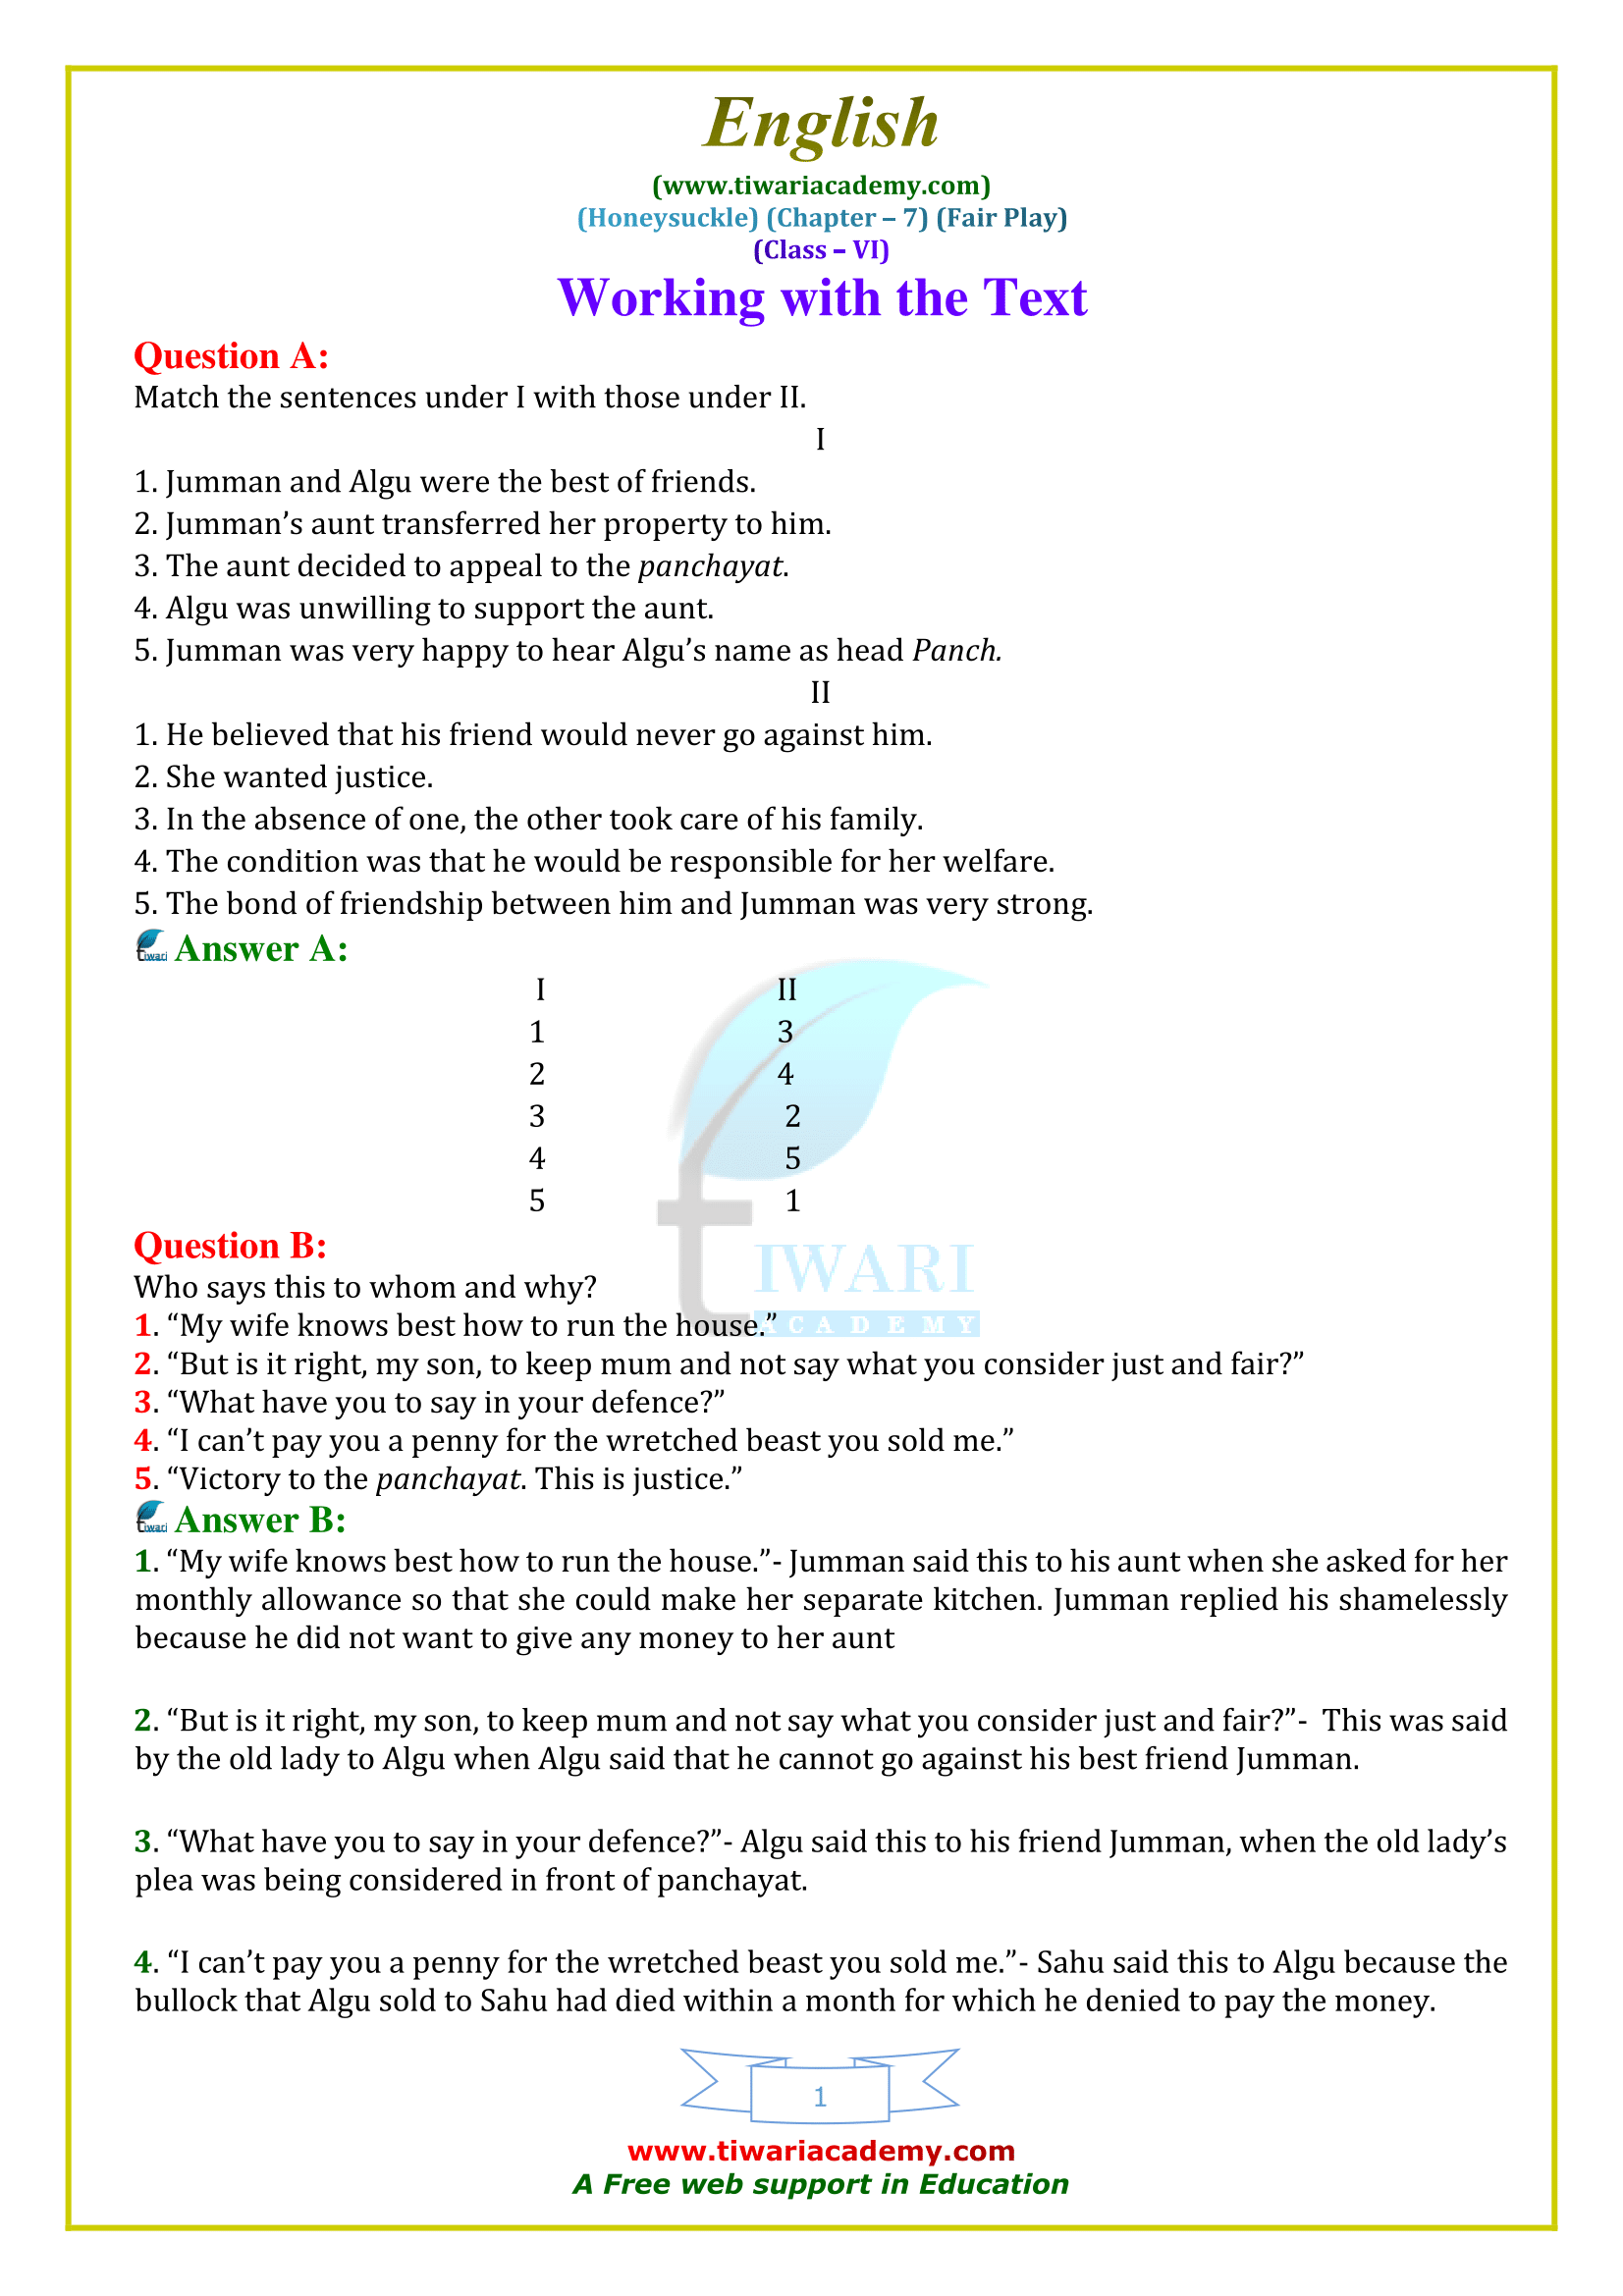 NCERT Solutions for Class 6 English Honeysuckle Chapter 7 Fair Play